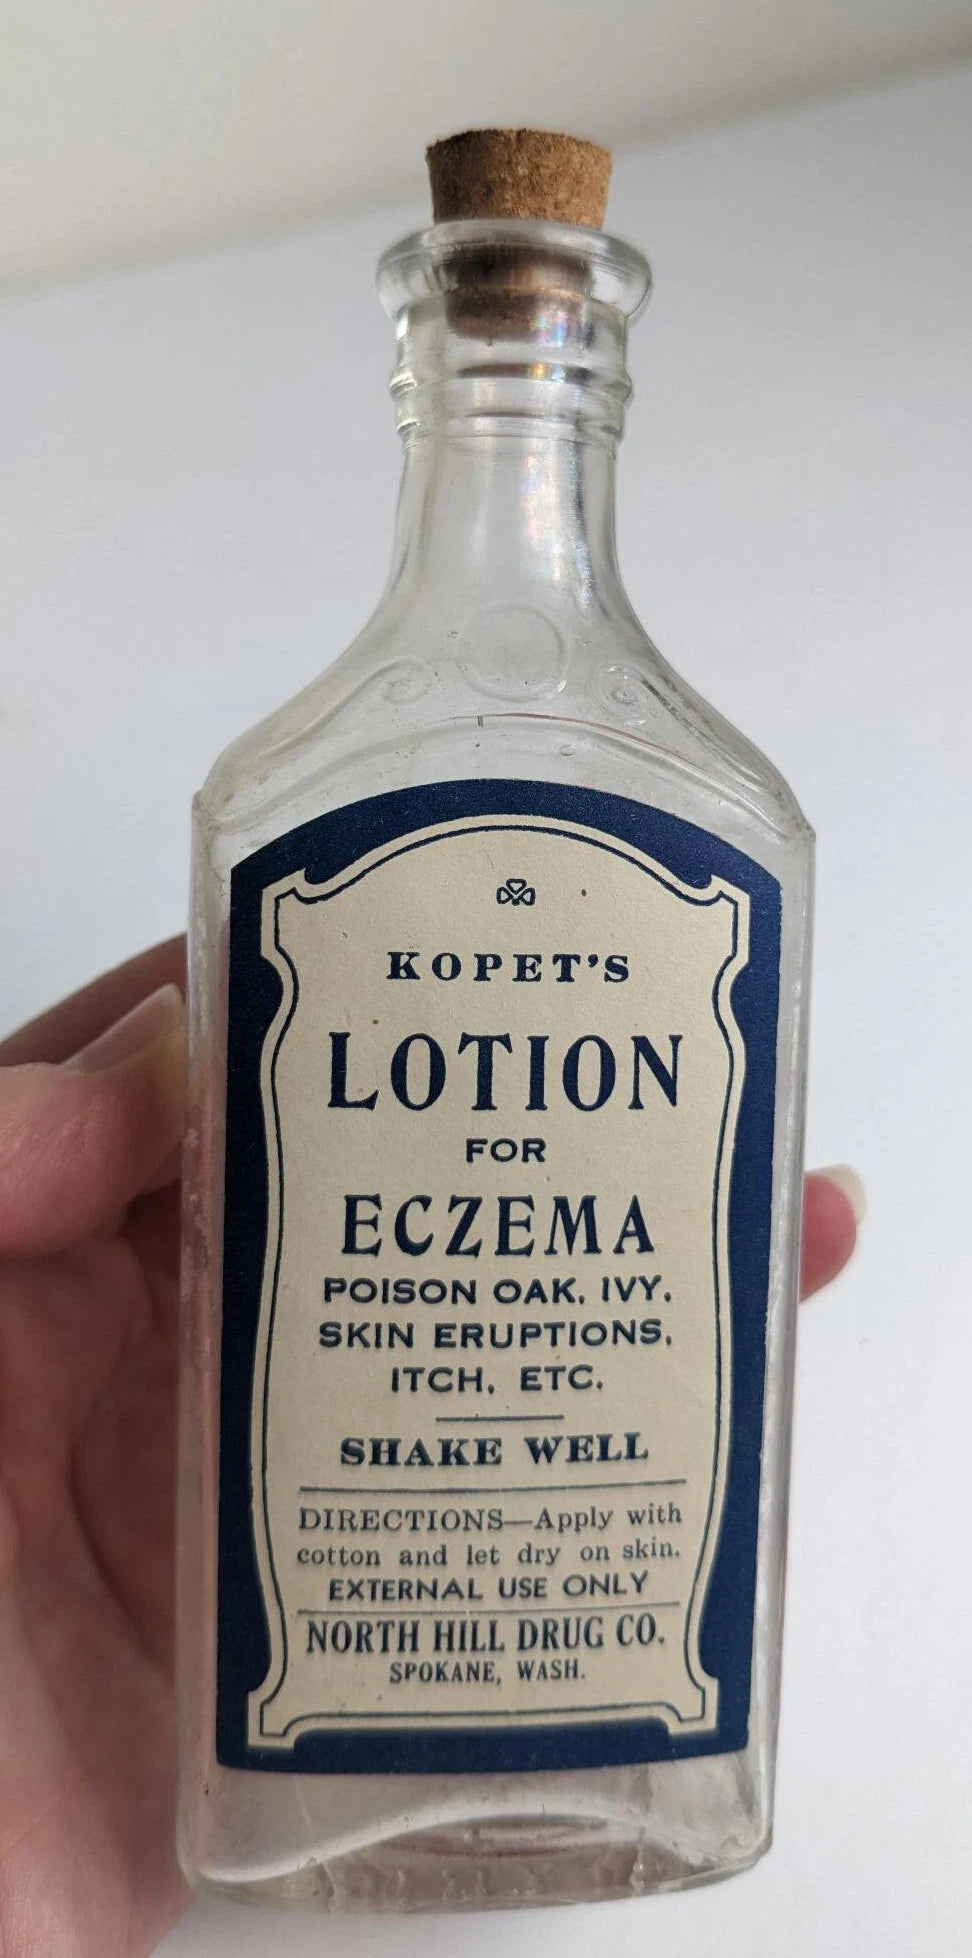 Vintage Antique Style Bottles - Antiseptic Spray and Gargle, Lotion for Eczema, Cucumber Cream and Hair Pomade Labels